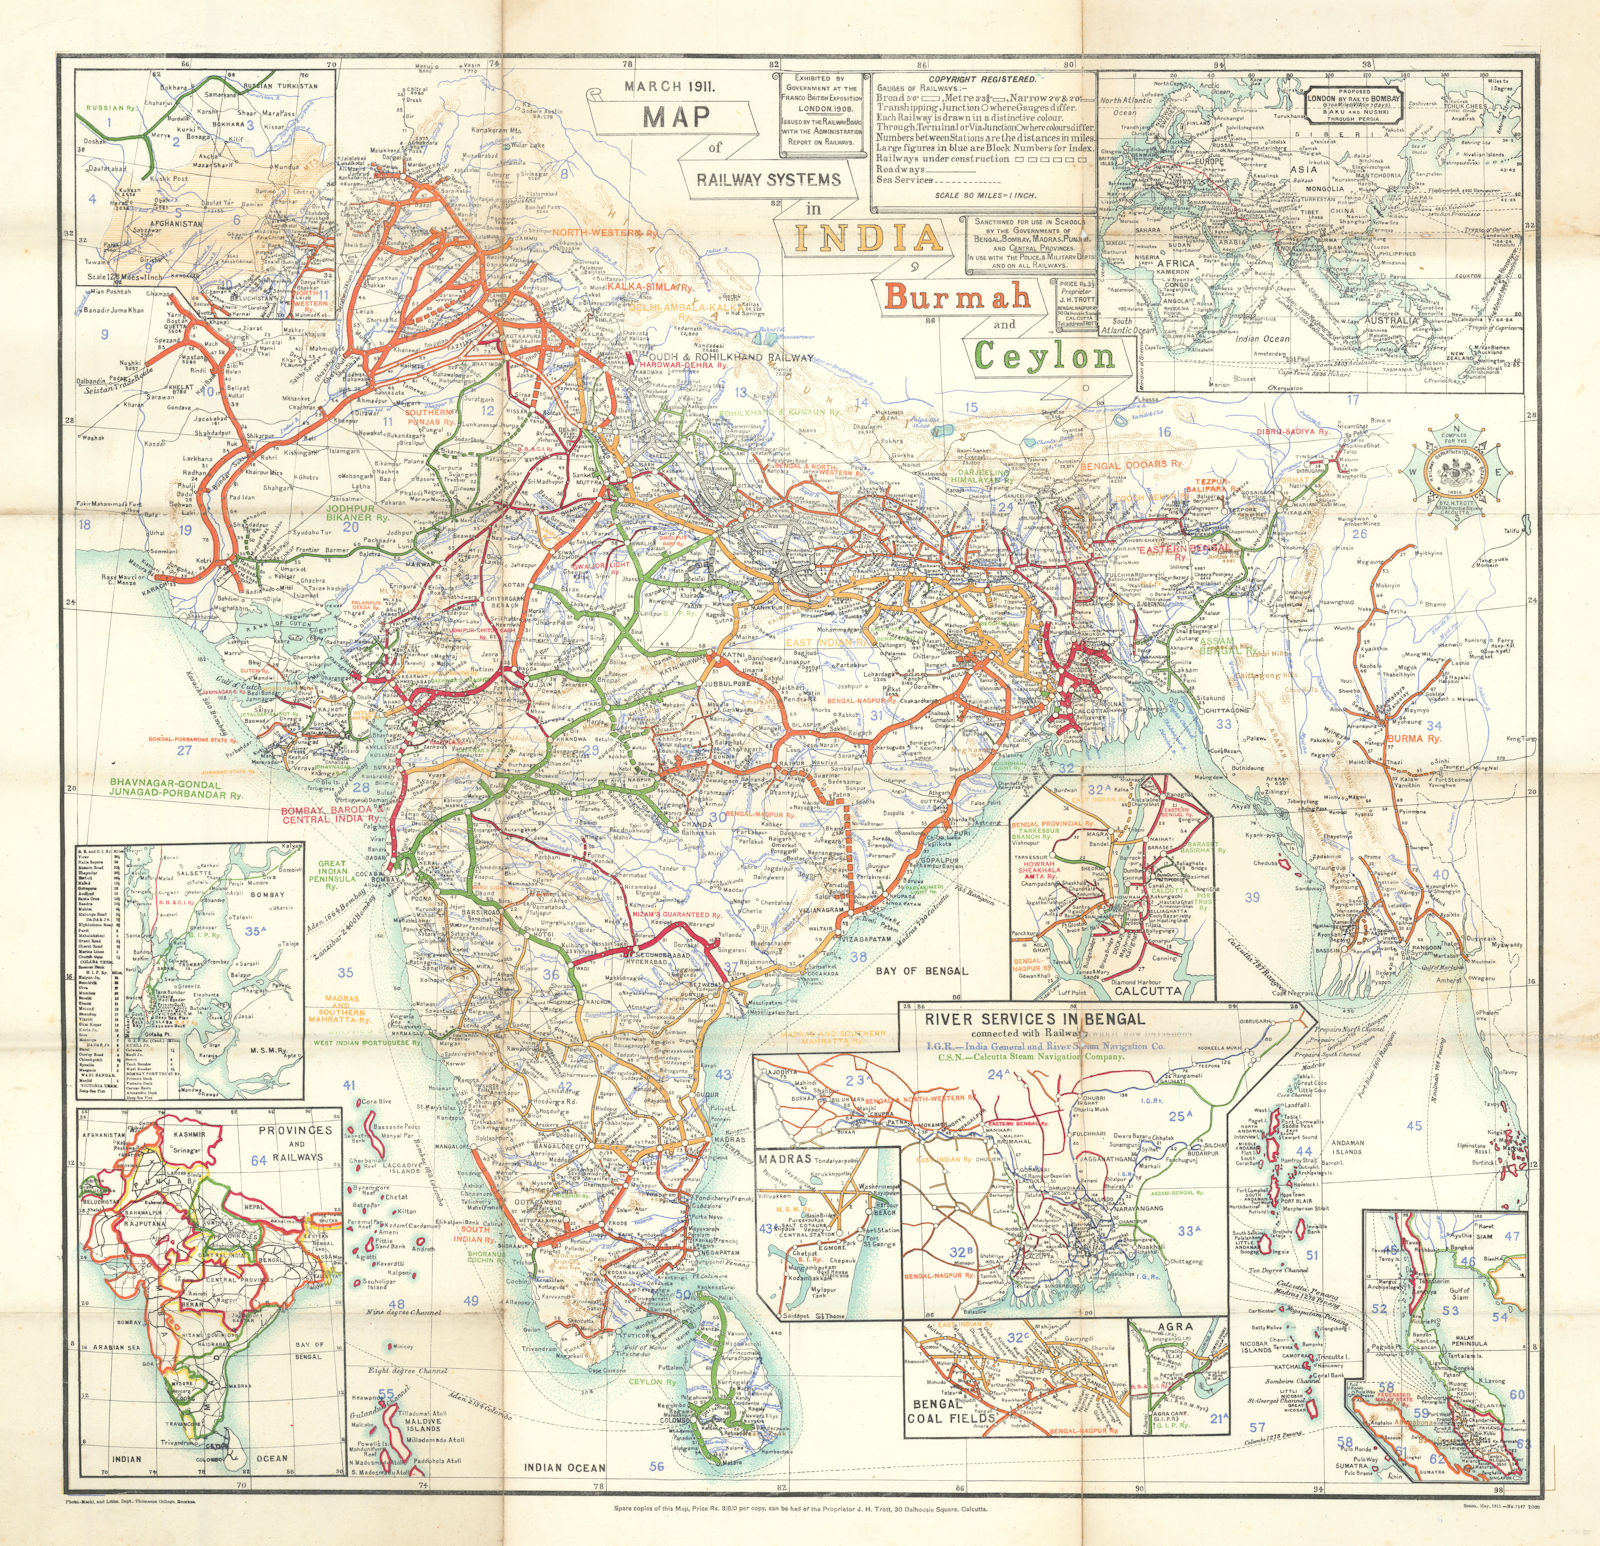 Map of Railway systems in India, Burmah & Ceylon. TROTT. March 1911 old